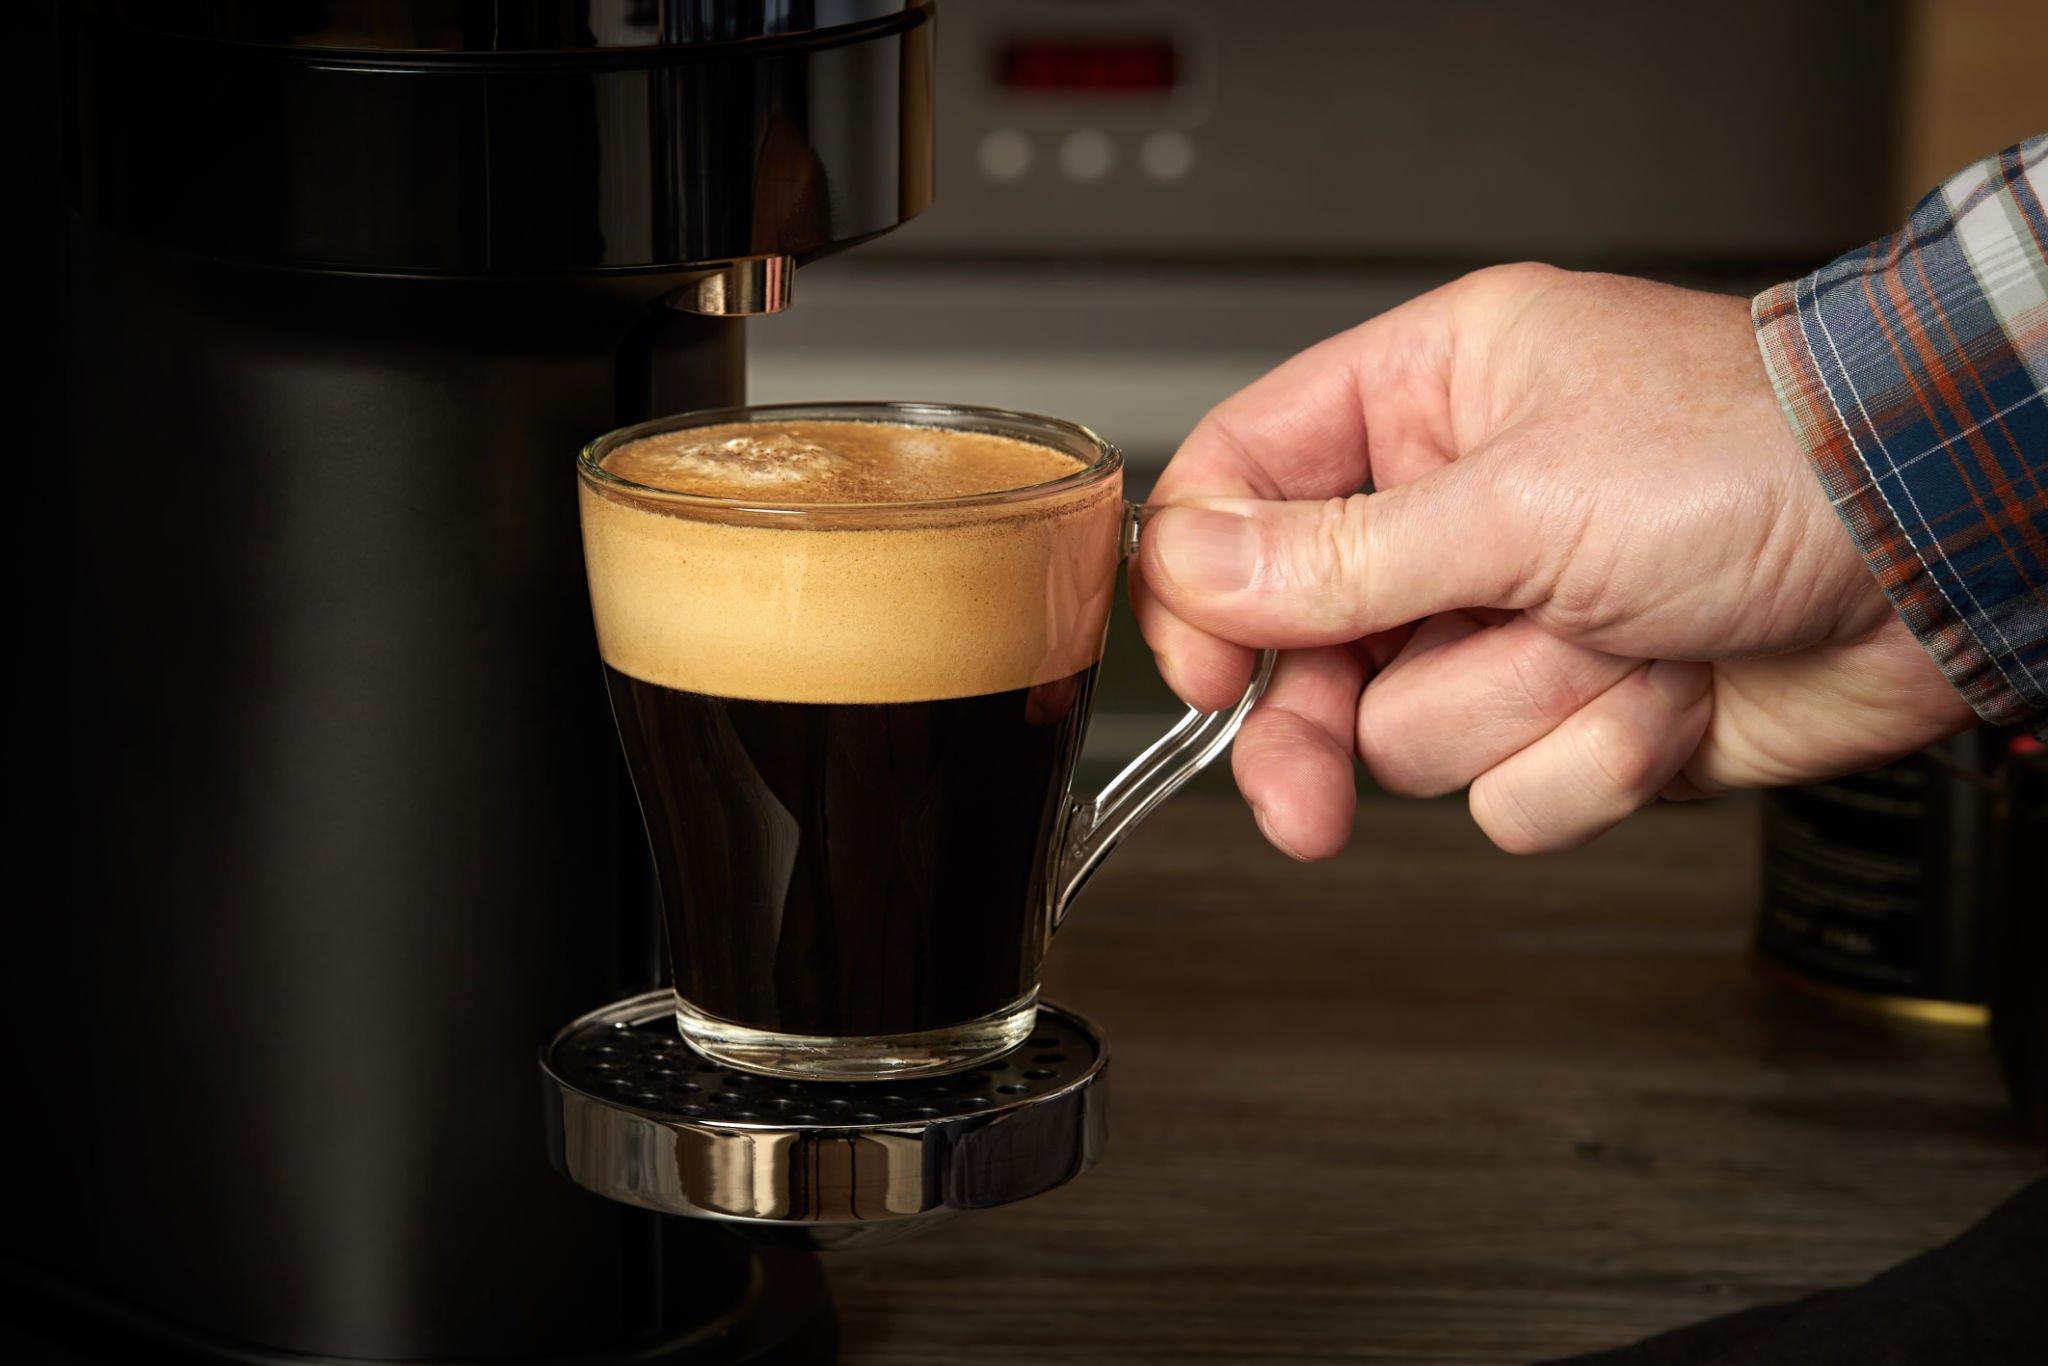 Do you know the difference between an Americano and Espresso?